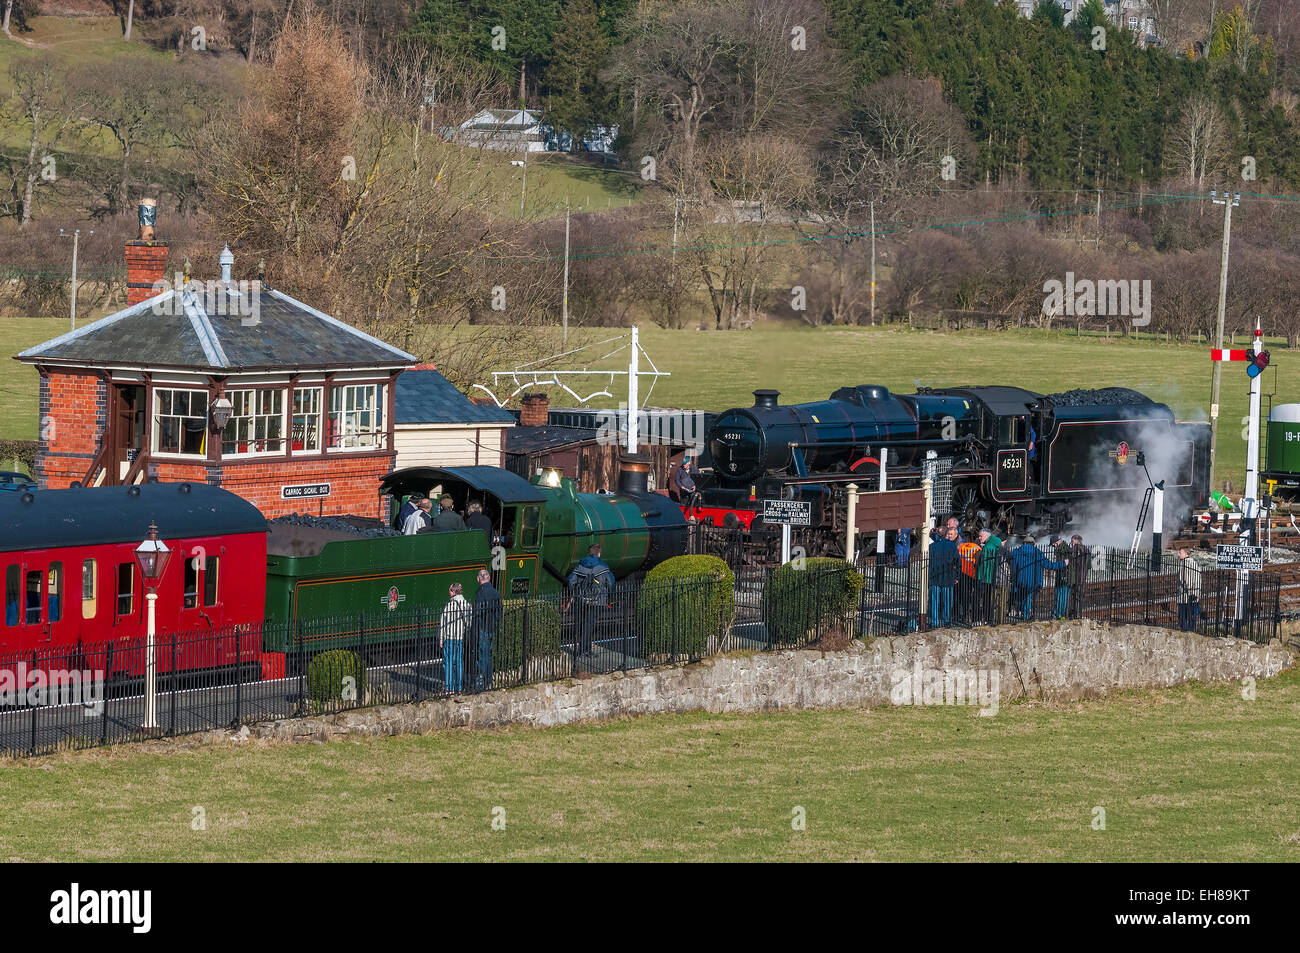 Steam & Stars 4, at the Langollen railway March 7 2015. The scene at Carrog station. Stock Photo